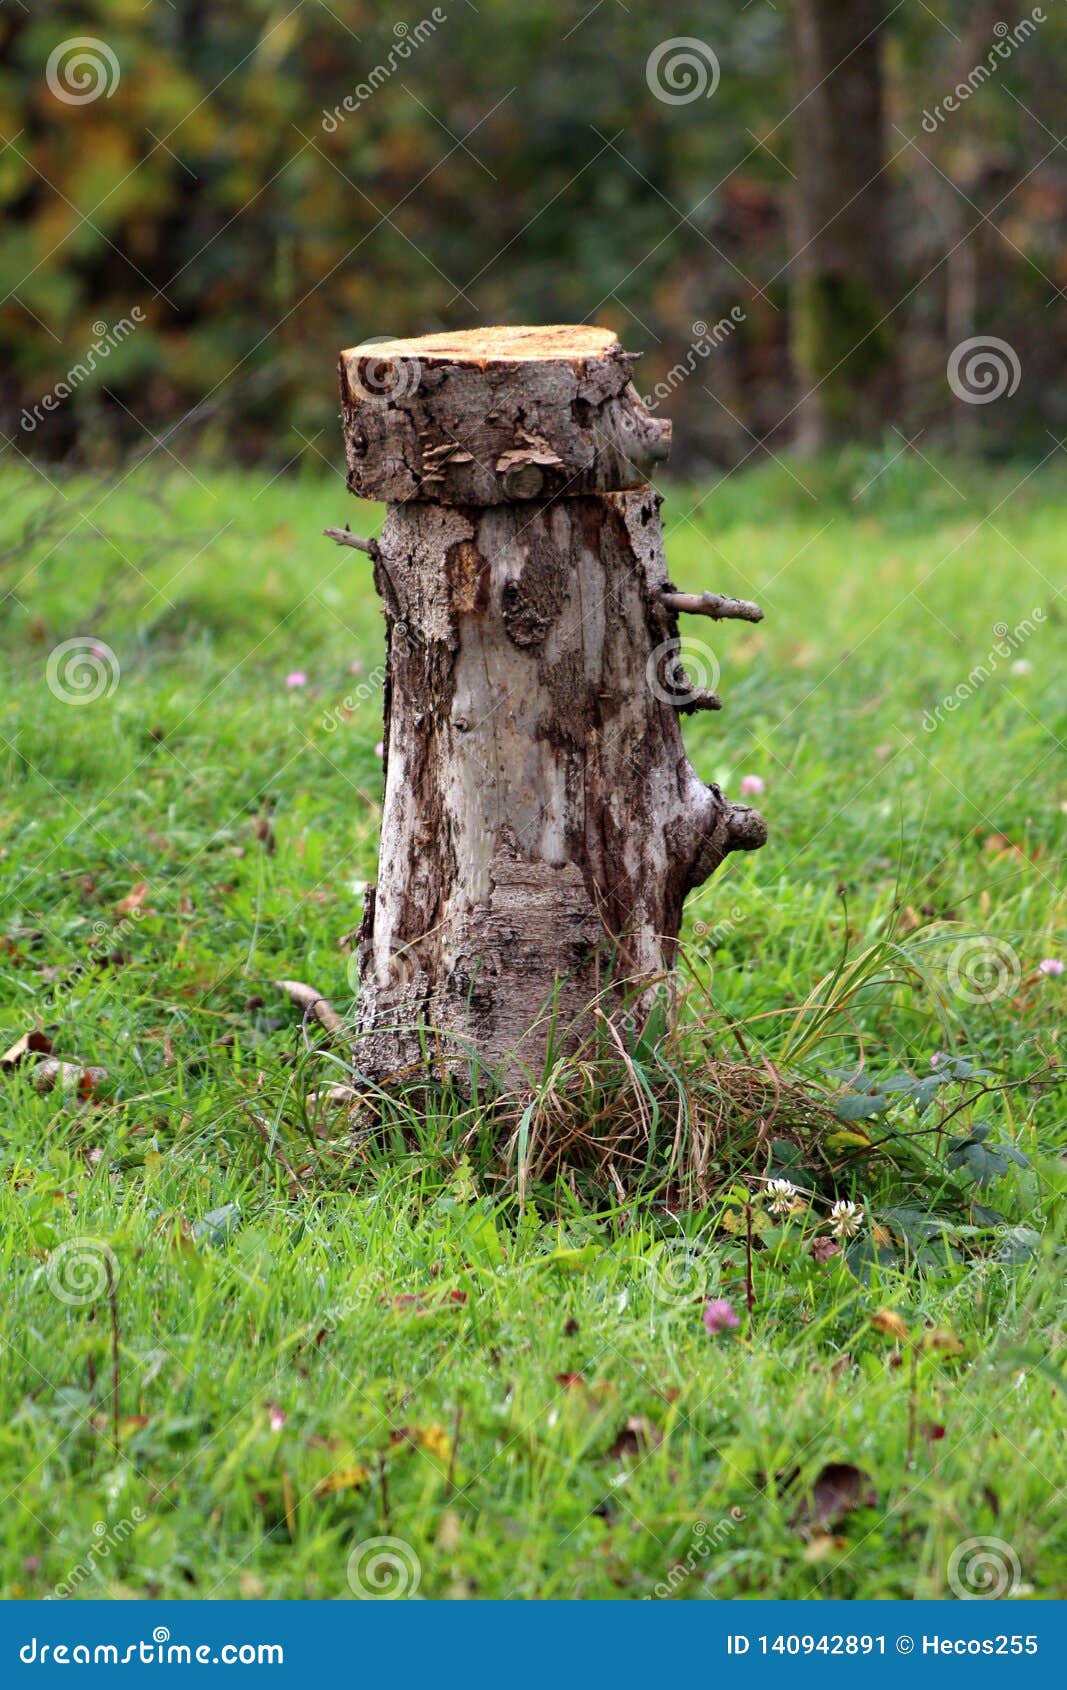 Cut Down Tree Stump Now Used As Garden Decoration And For Sitting